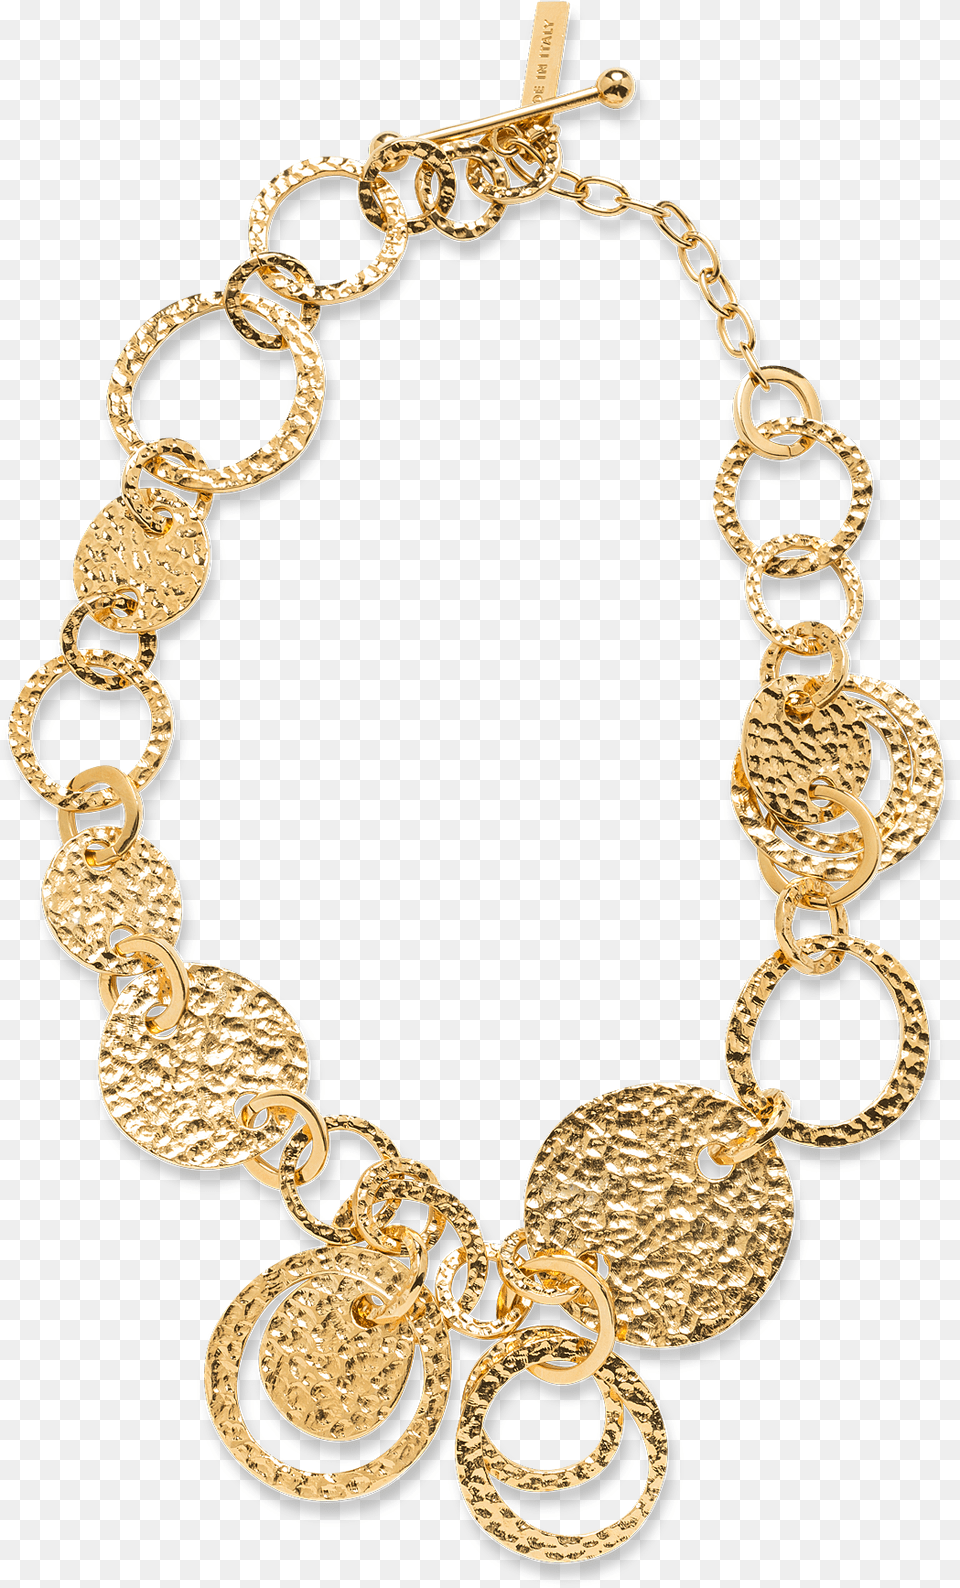 Galvanic Gold Necklace Chain Accessories, Bracelet, Jewelry Free Transparent Png